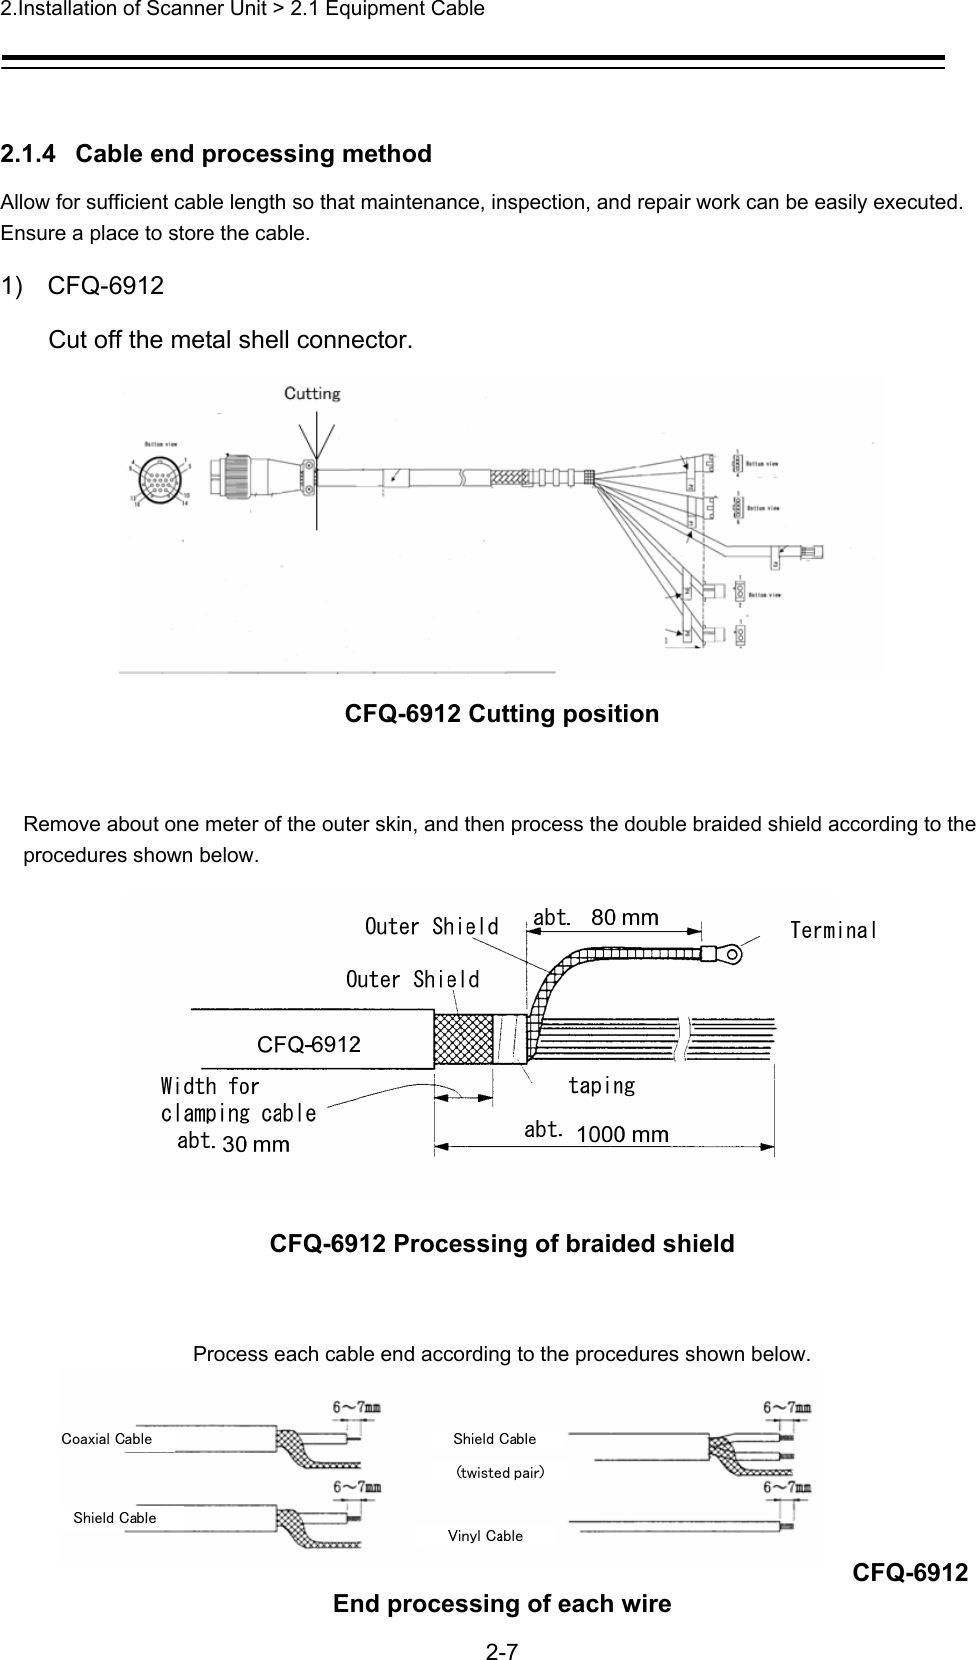 2.Installation of Scanner Unit &gt; 2.1 Equipment Cable   2-7  2.1.4   Cable end processing method Allow for sufficient cable length so that maintenance, inspection, and repair work can be easily executed.   Ensure a place to store the cable. 1)  CFQ-6912 Cut off the metal shell connector.  CFQ-6912 Cutting position  Remove about one meter of the outer skin, and then process the double braided shield according to the procedures shown below.  CFQ-6912 Processing of braided shield  Process each cable end according to the procedures shown below.   CFQ-6912 End processing of each wire